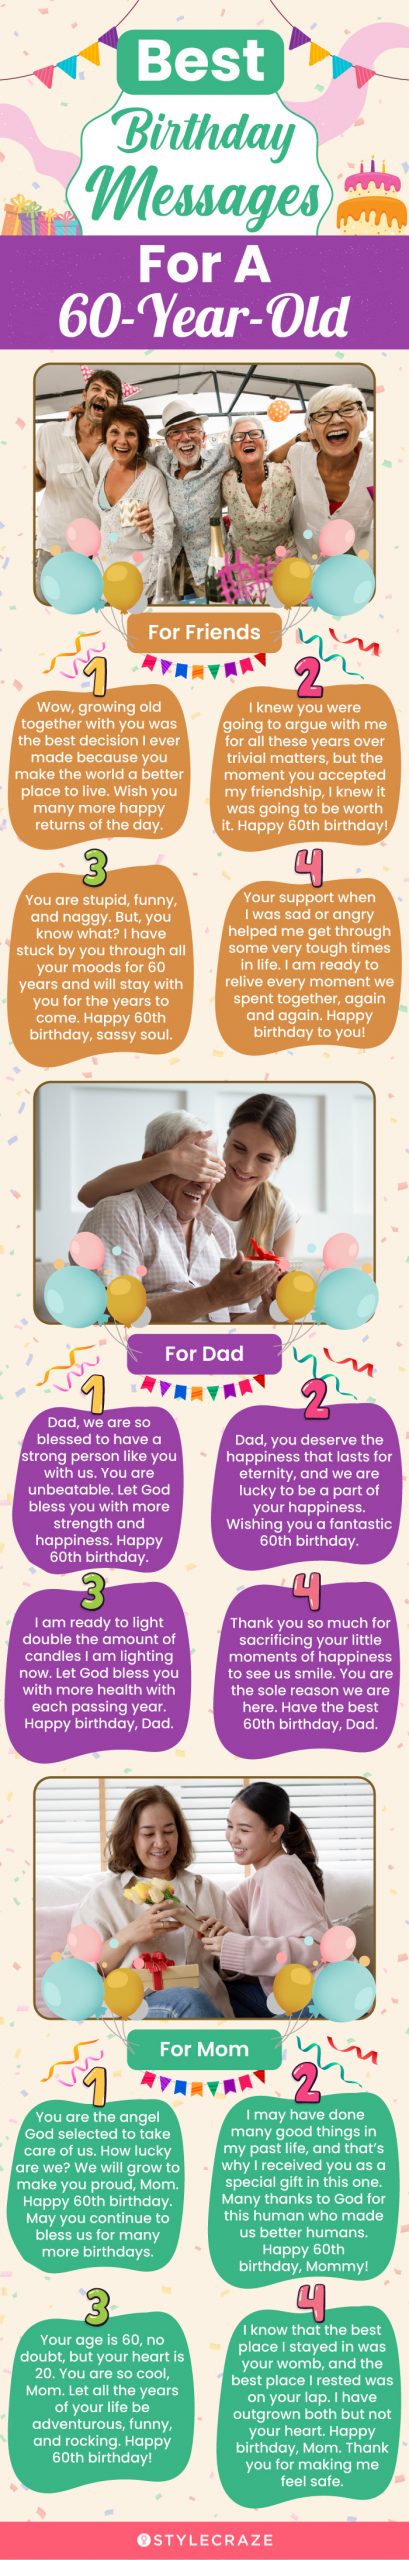 best birthday messages for a 60 year old (infographic)